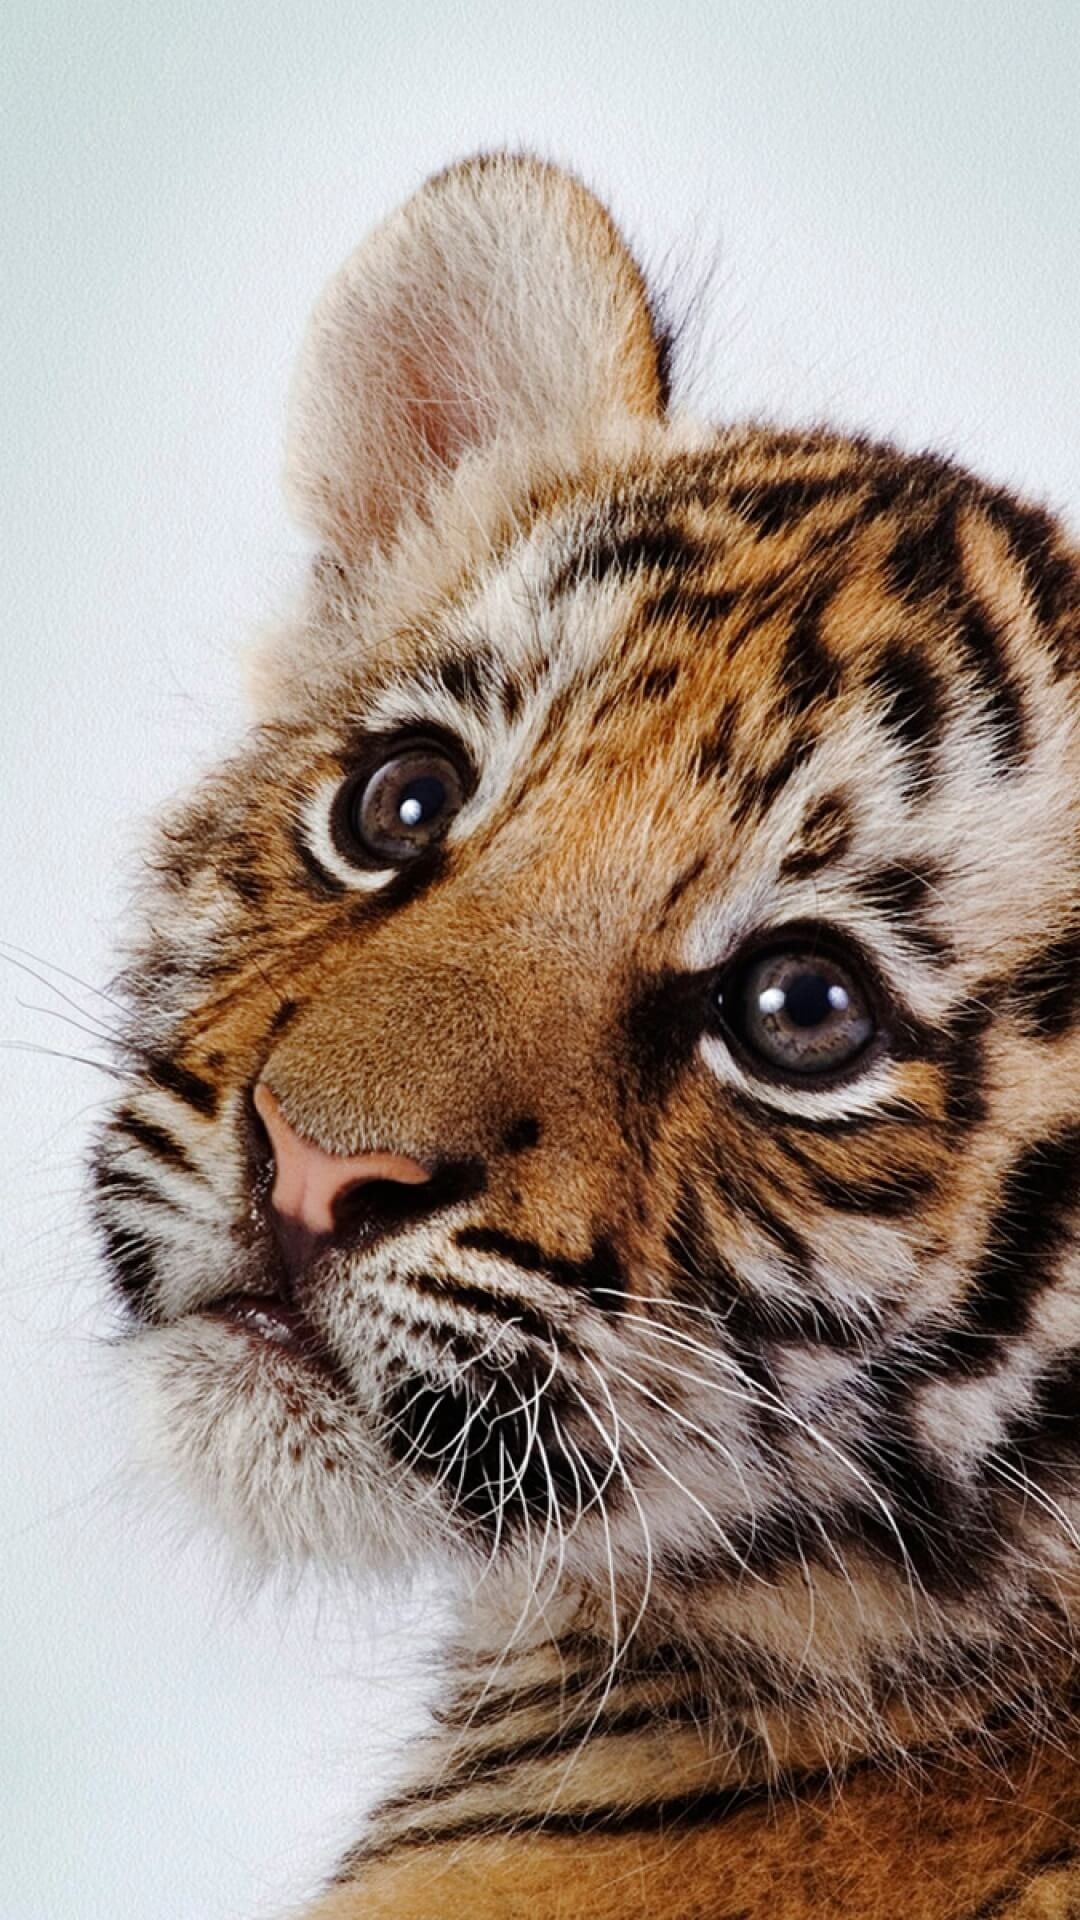 Free download Cute Baby Tiger Wallpaper - [1080x1920]